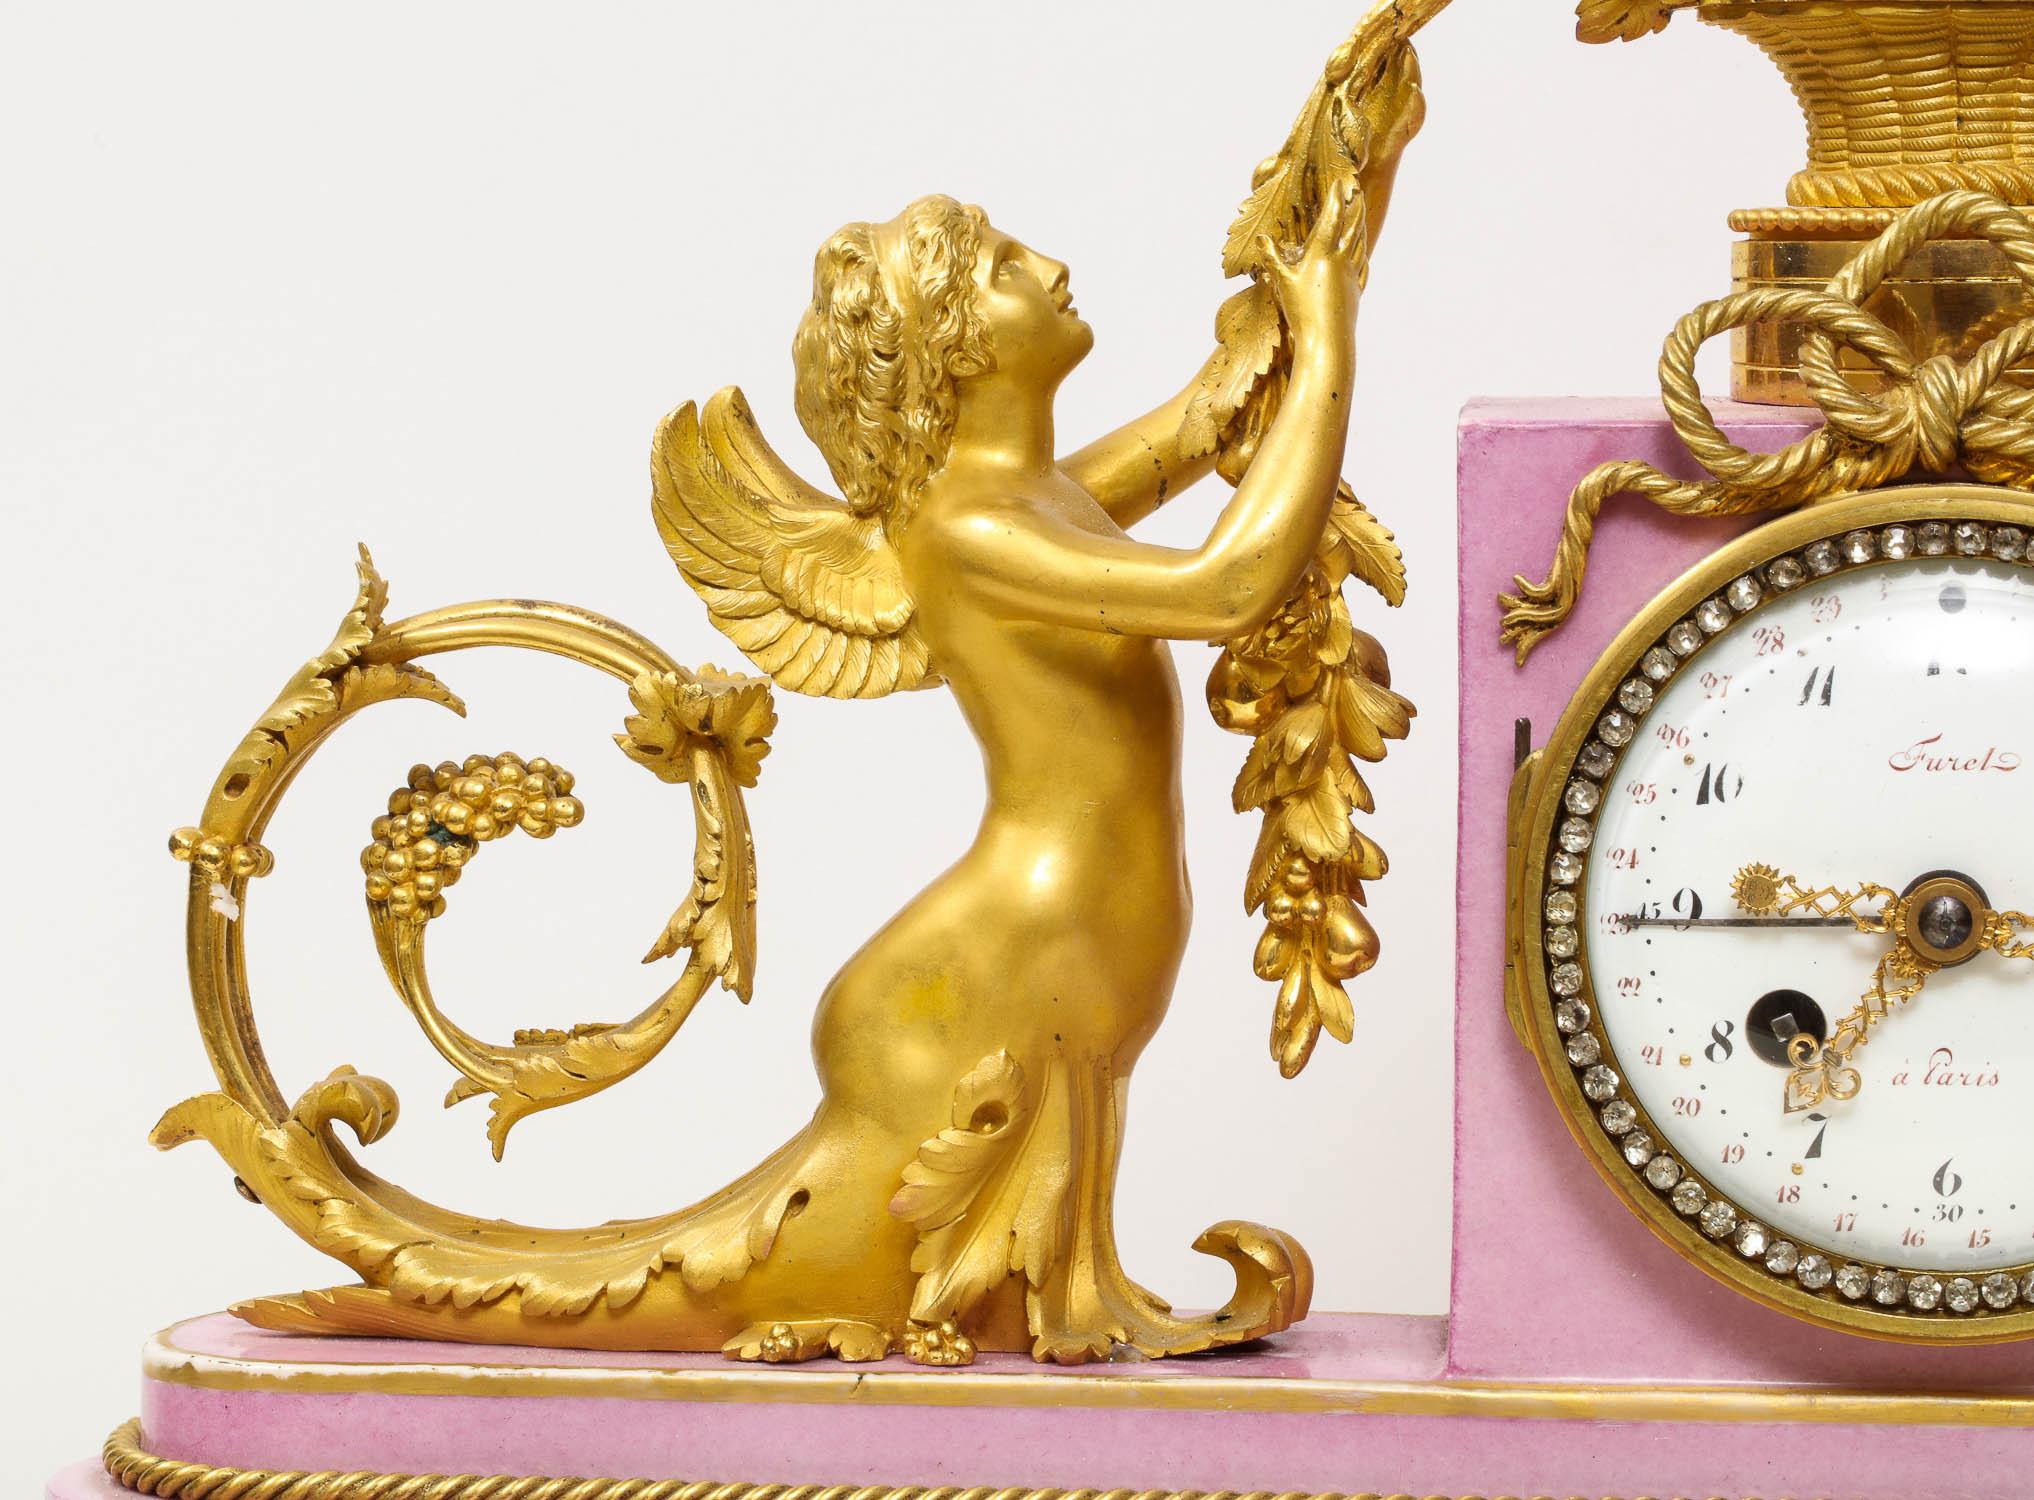 Exquisite French Ormolu and Pink Porcelain Clock Set after Francois Remond 1